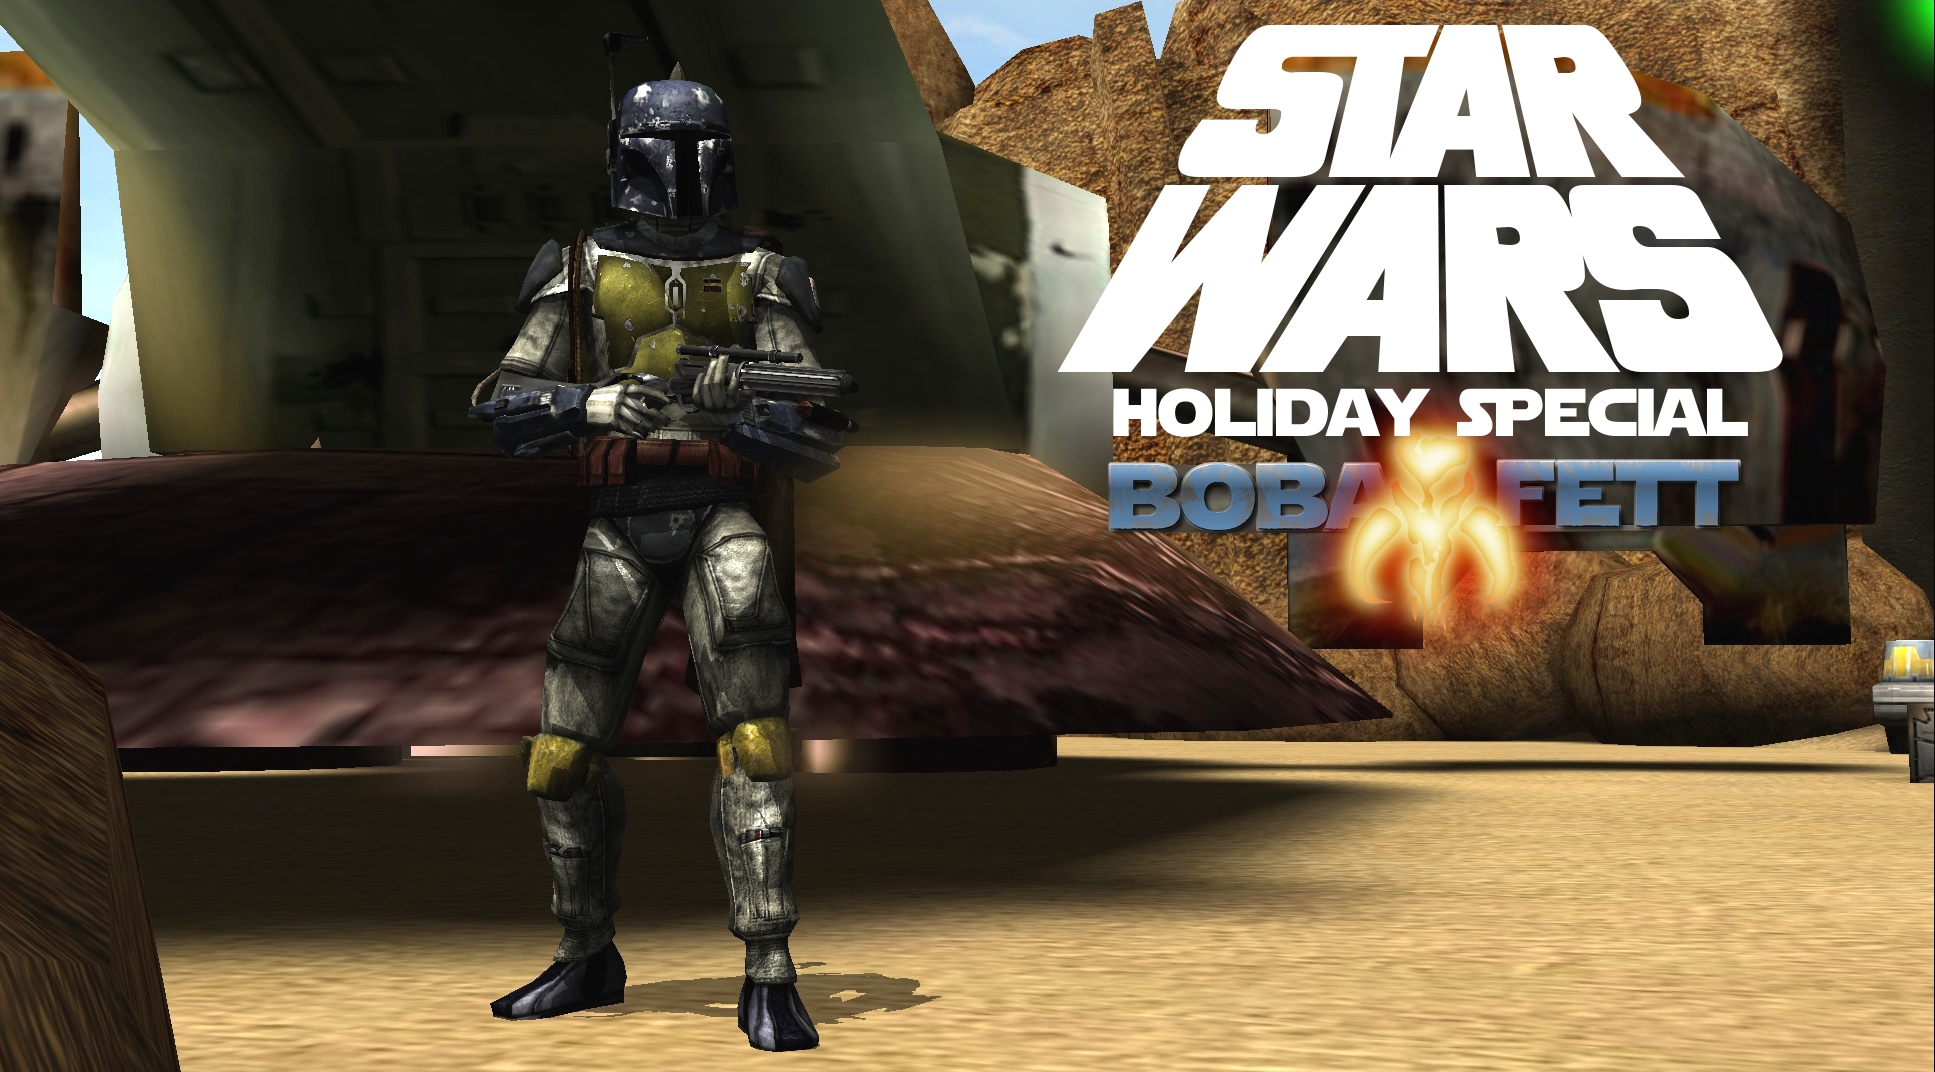 More information about "Holiday Special Boba Fett"